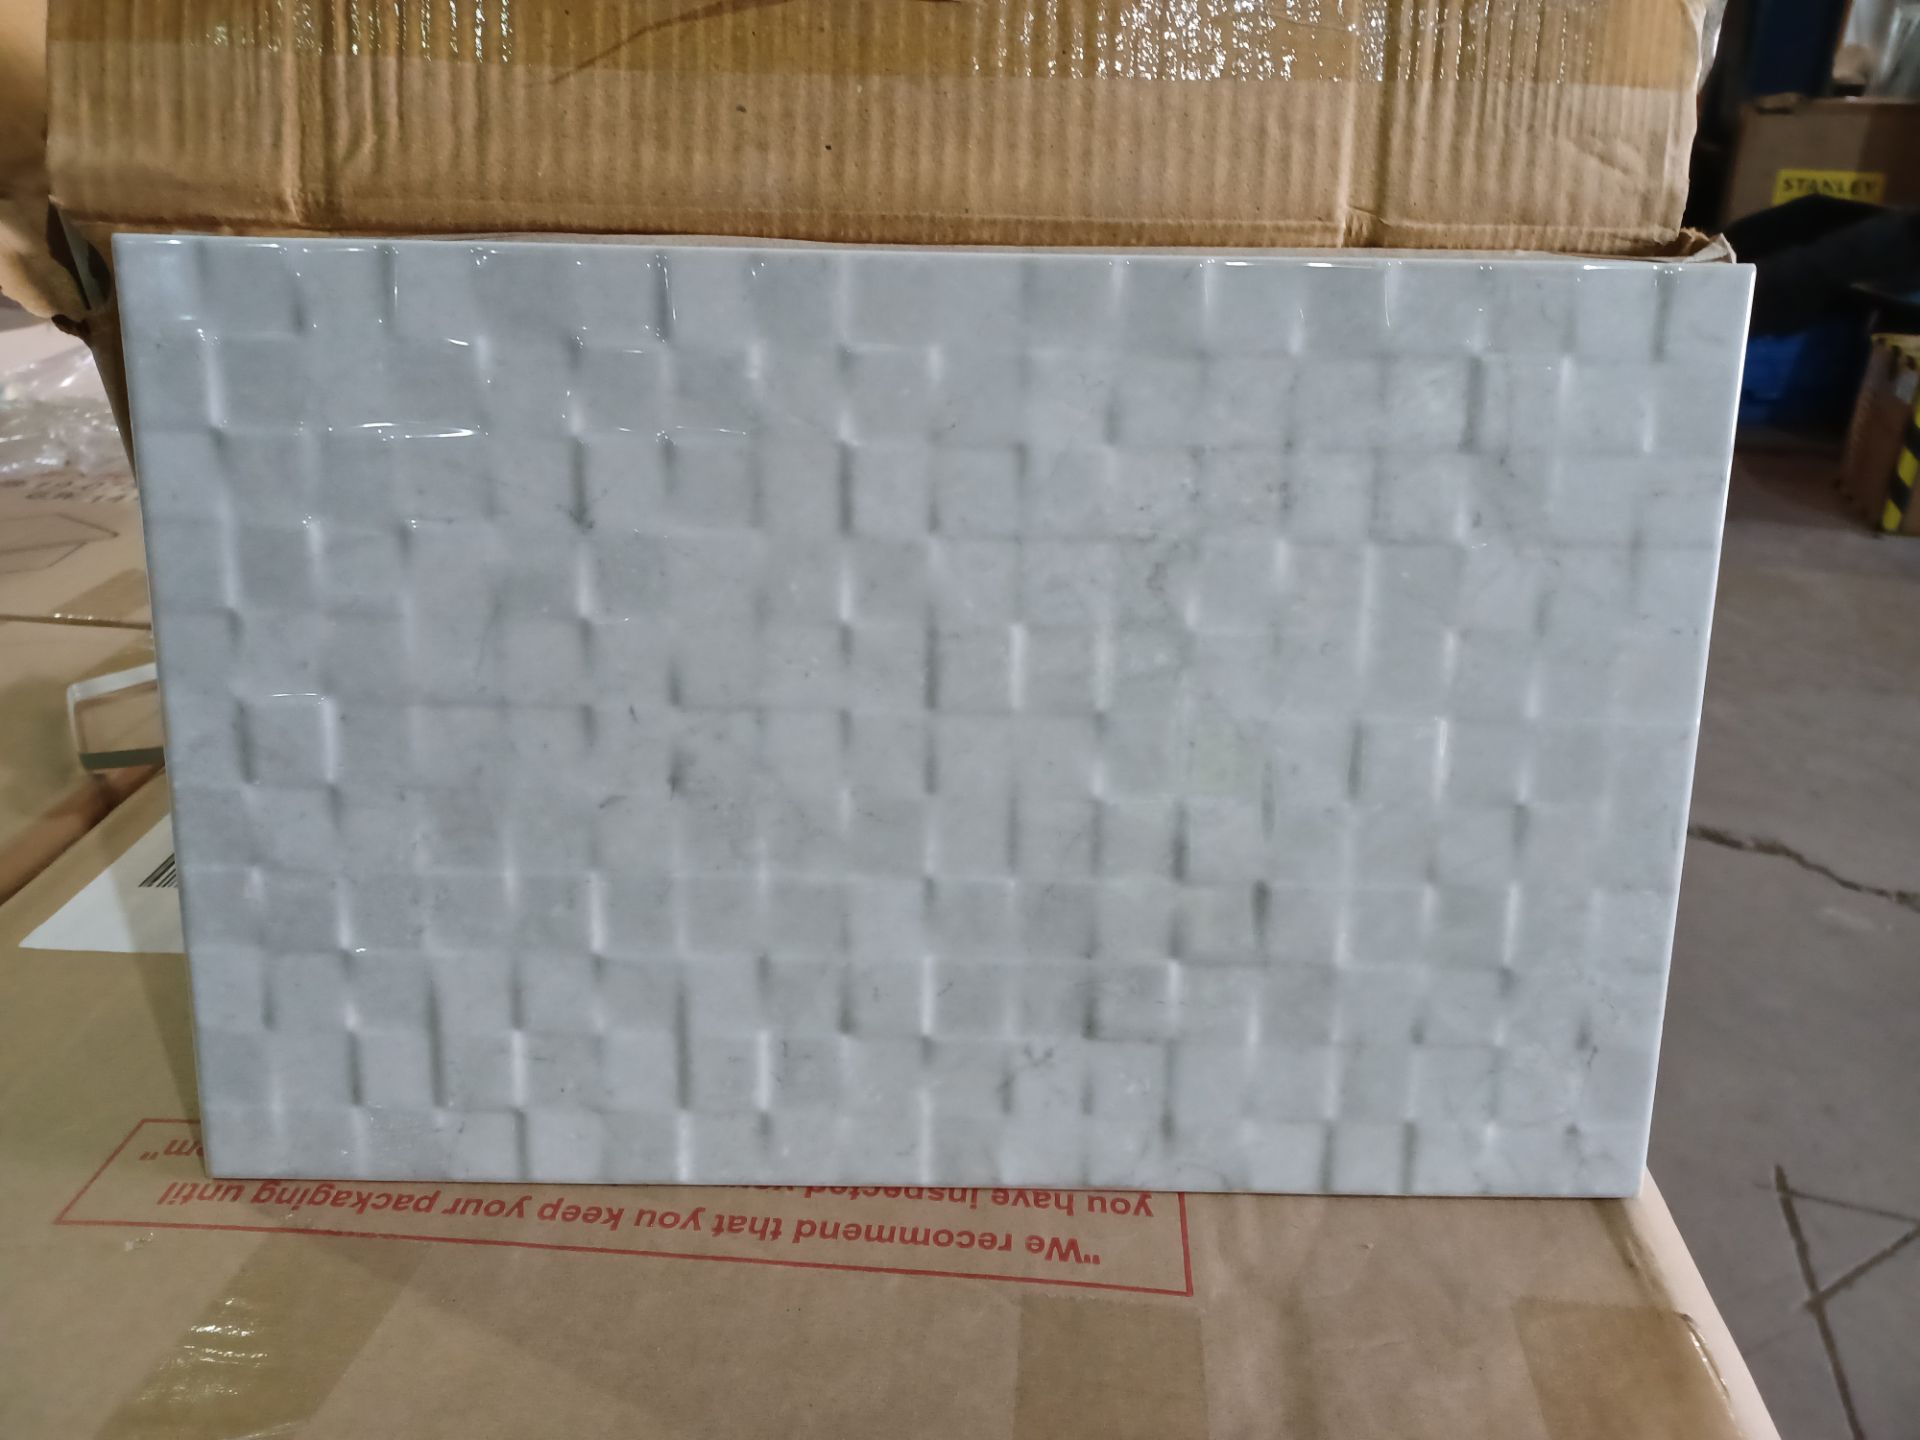 12 x PACKS OF IDEAL MARBLE DÉCOR GLAZED CERAMIC WALL TILES. SIZE: 400mm(L) x 250mm (H). 7.5mm THICK.